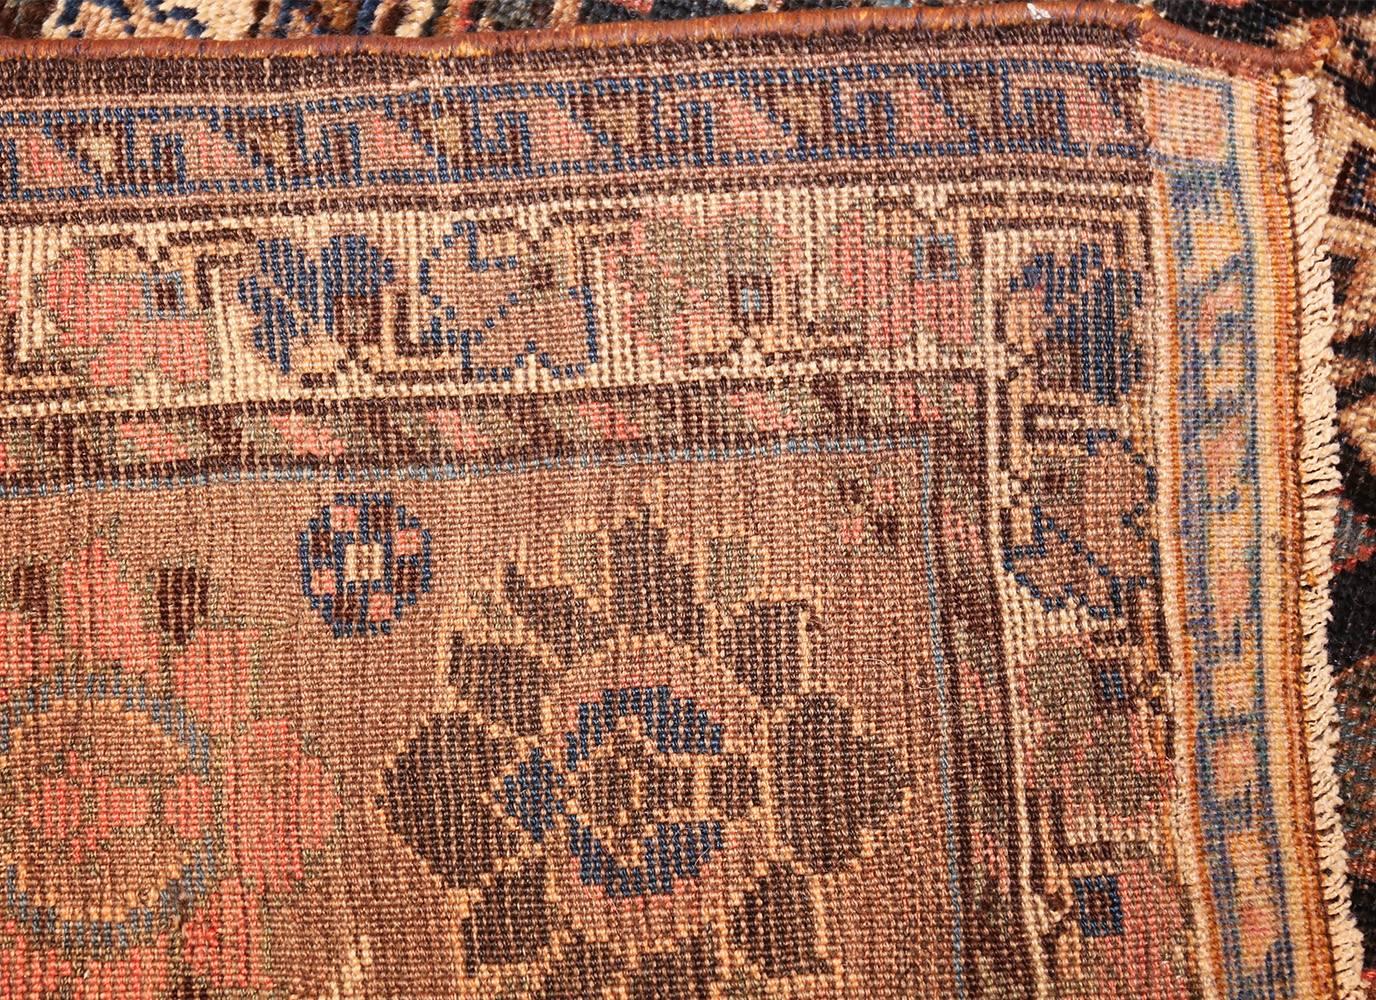 Antique Persian Qashqai Gallery Size Rug, Country of Origin: Persia, Circa Date: Turn of the Twentieth Century – Size: 7 ft x 16 ft 8 in (2.13 m x 5.08 m)

This gallery size antique tribal and primitive design Persian Qashqai rug is meant to be